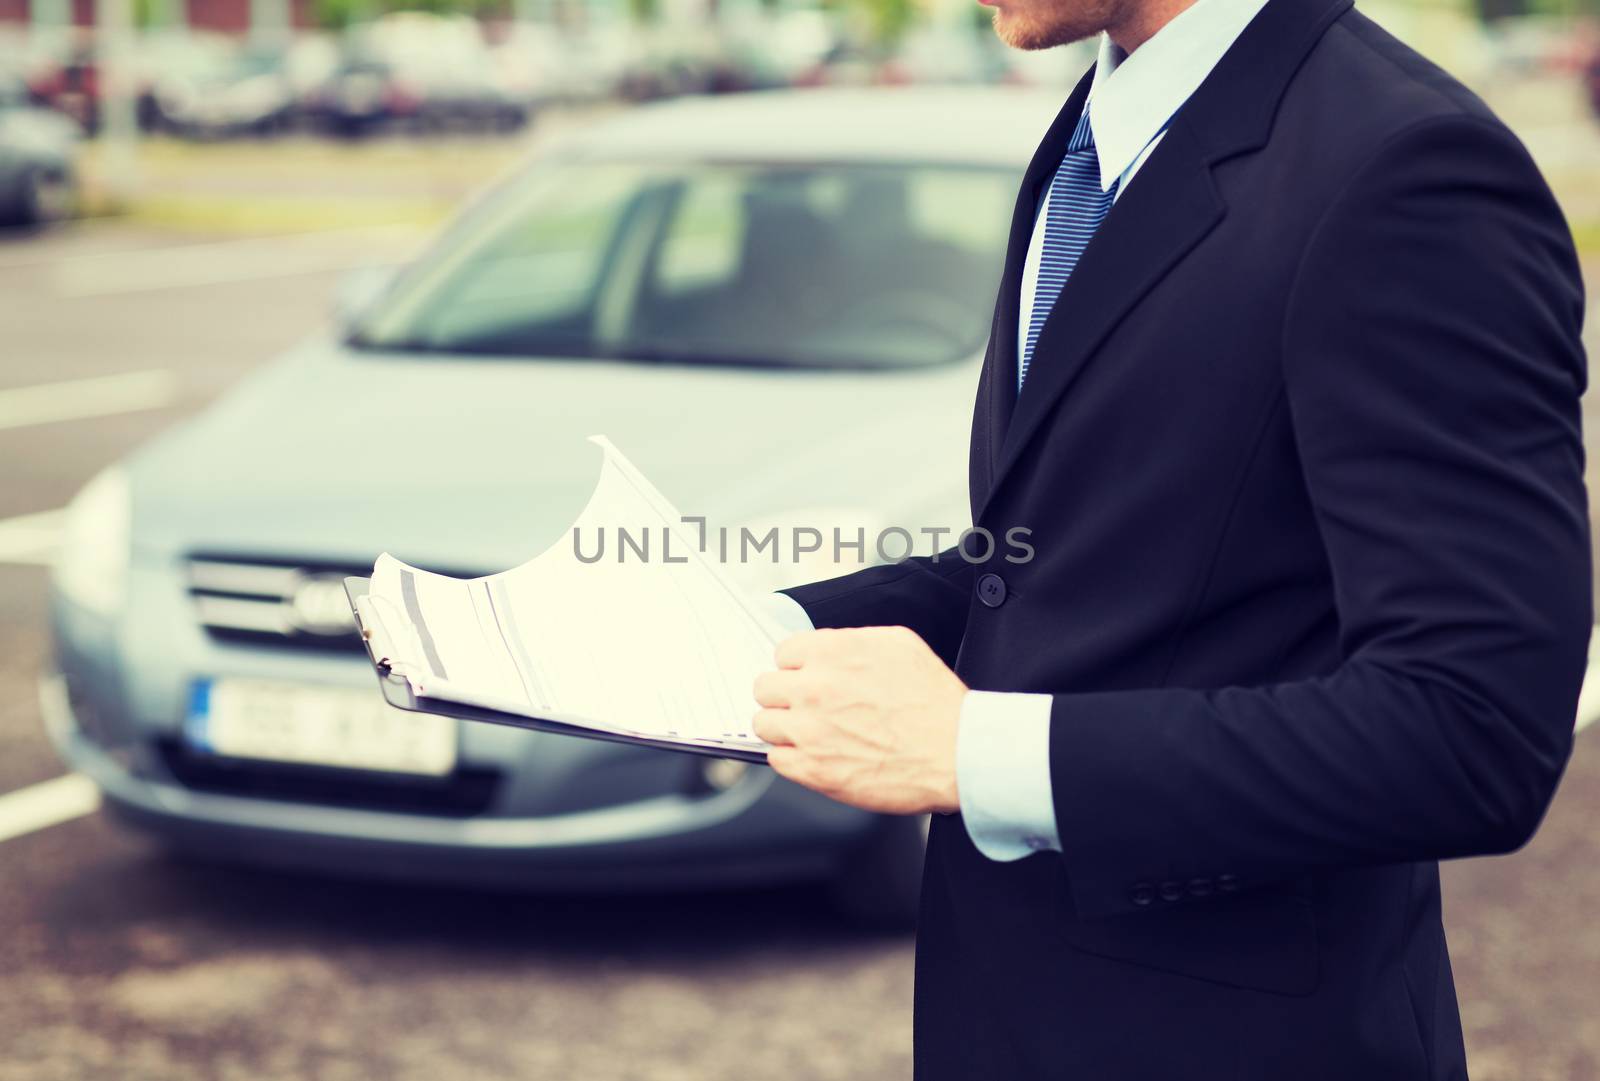 transportation and ownership concept - man with car documents outside